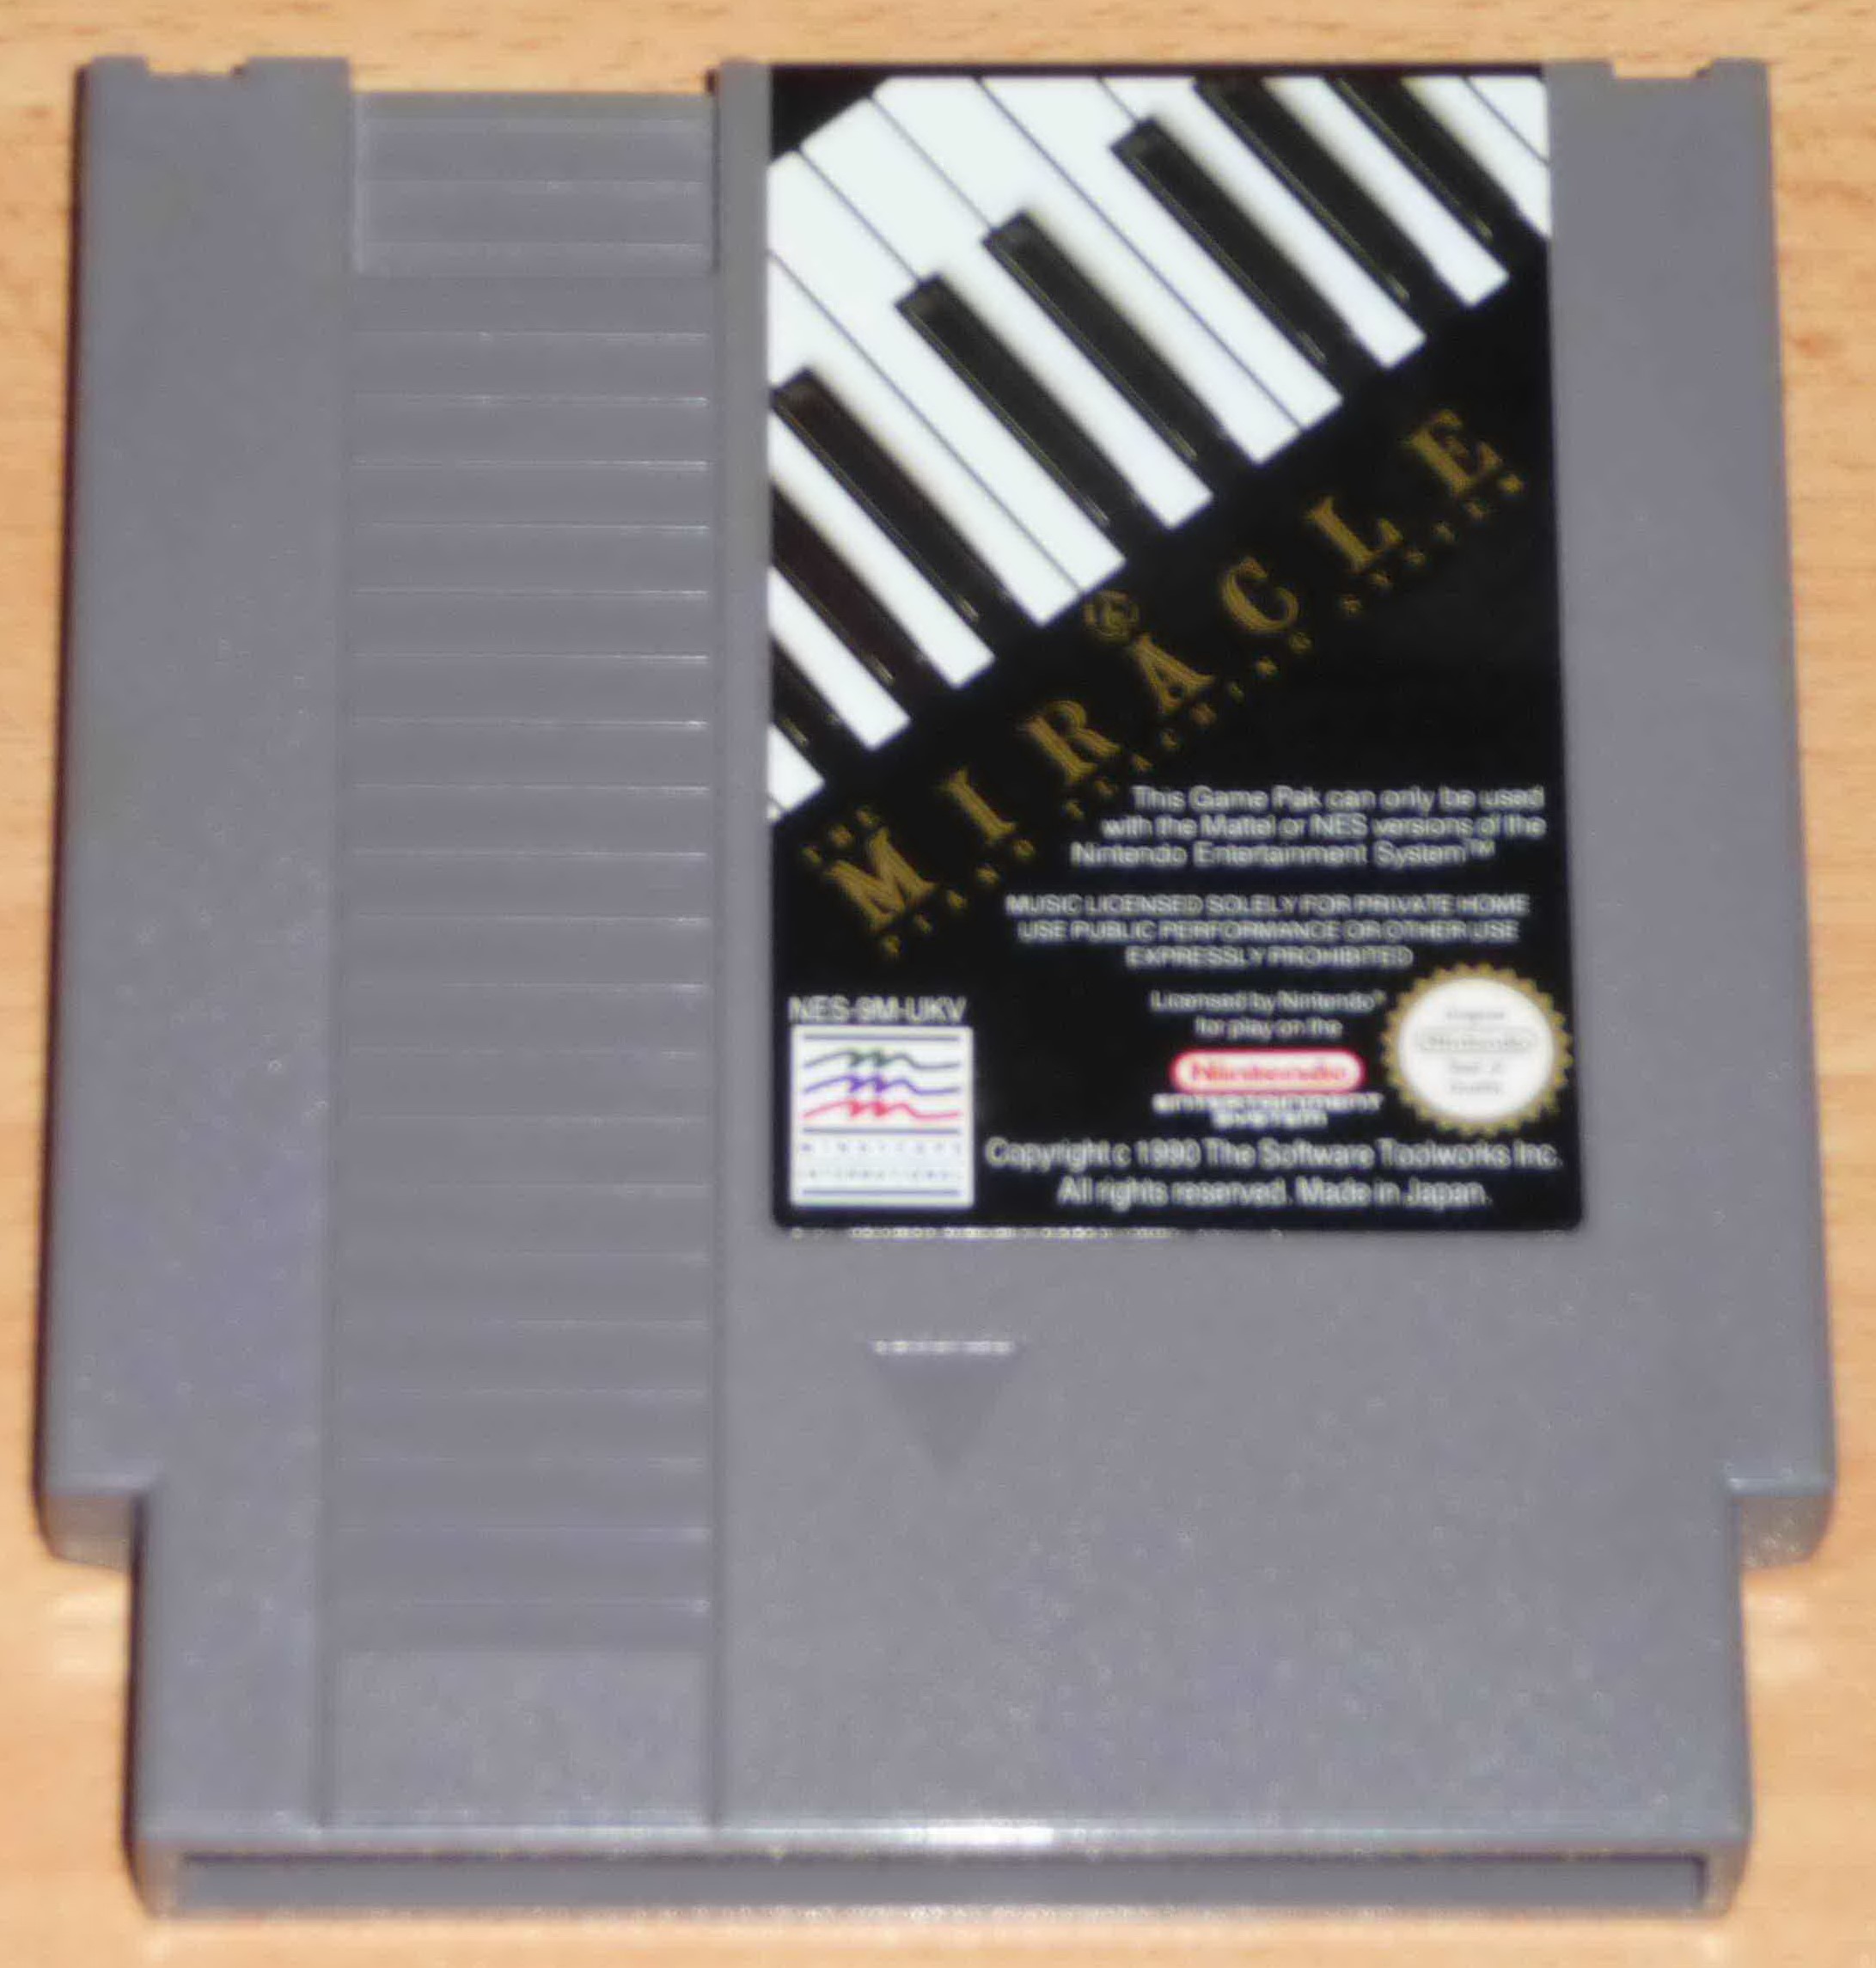 miracle piano teaching system when was it released